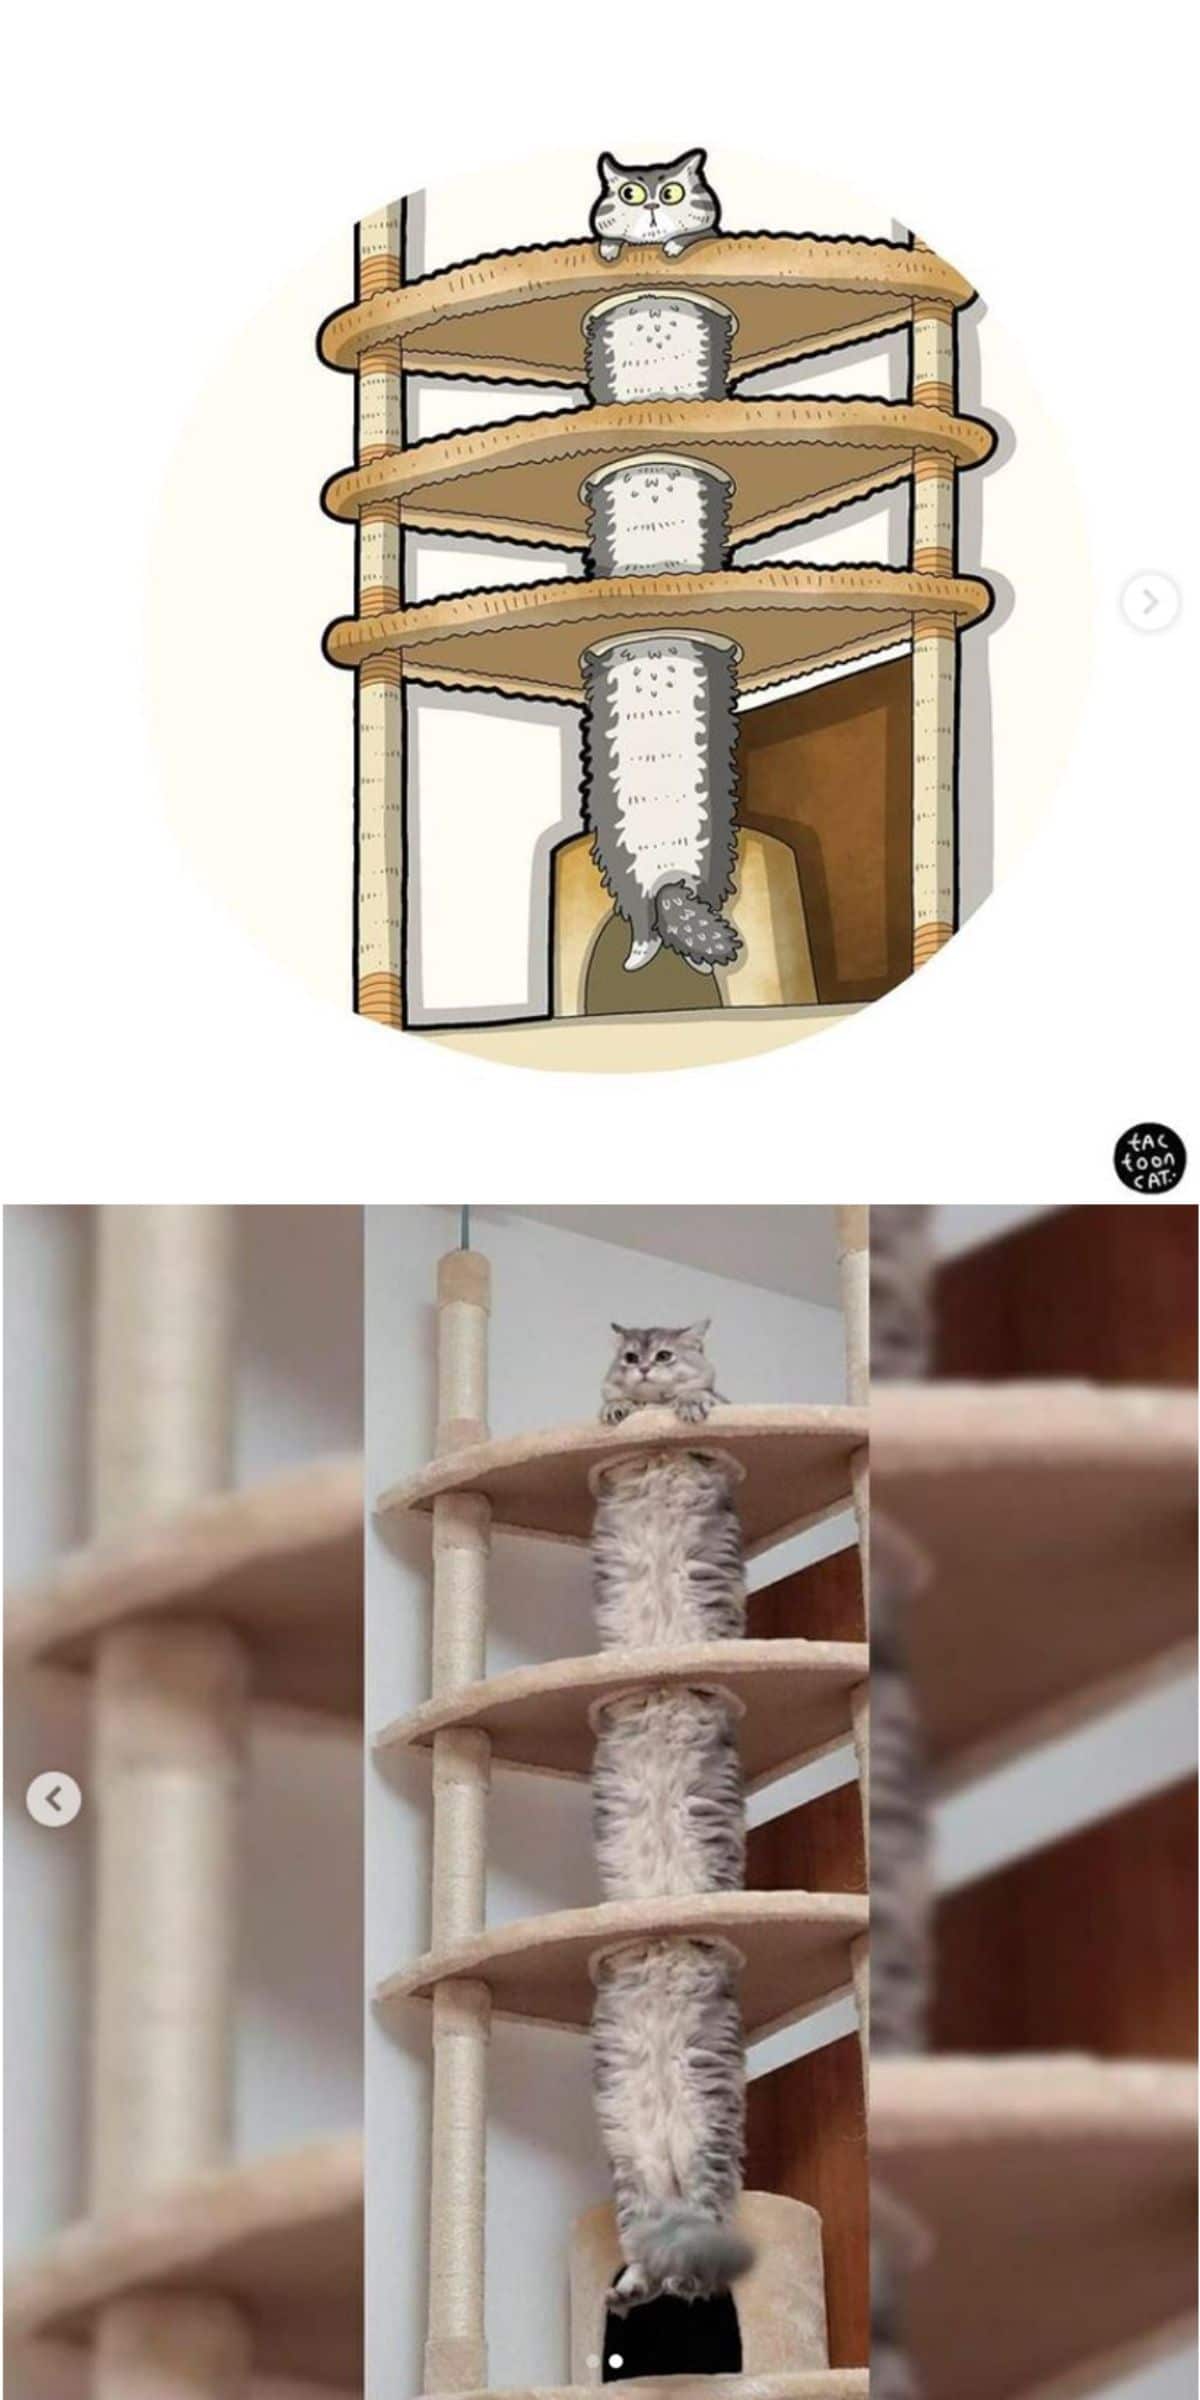 cartoon photo and real photo of a grey and white fluffy cat holding onto the top of a cat tree and dangling down through the climbing hole in the cat tree